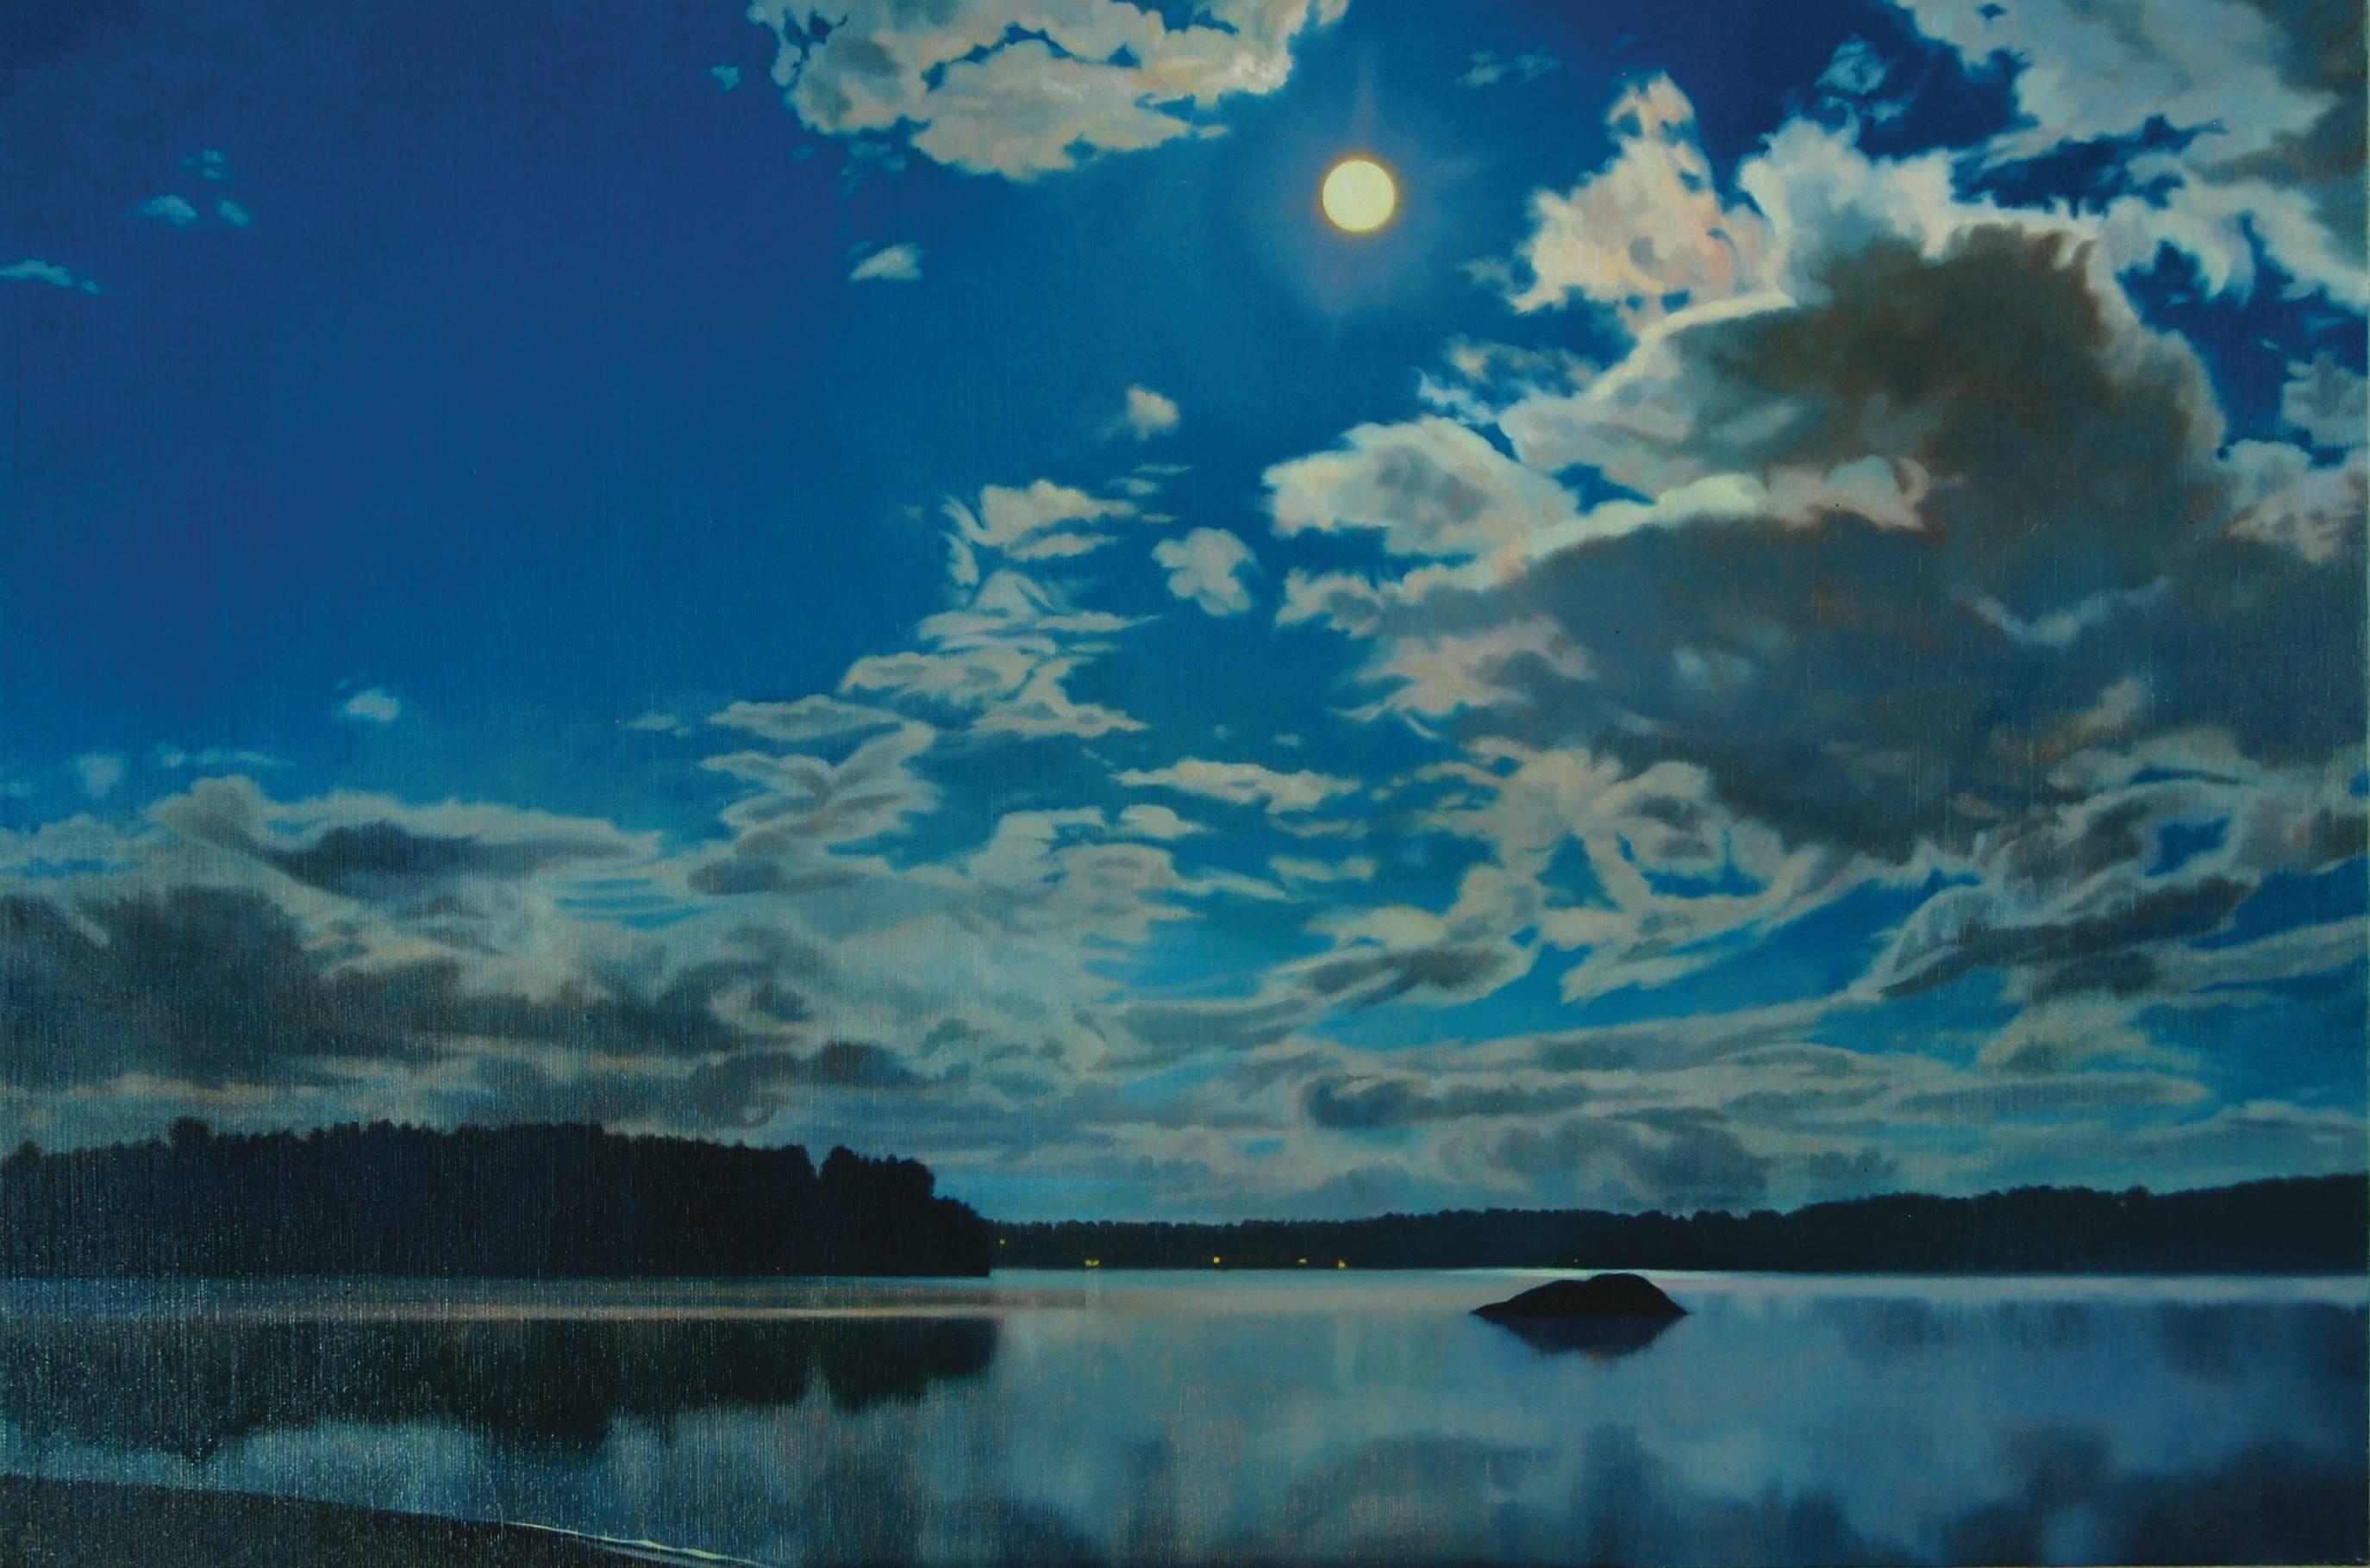 Kathleen Kolb Landscape Painting - Moon and Clouds, Landscape Oil Painting on Linen